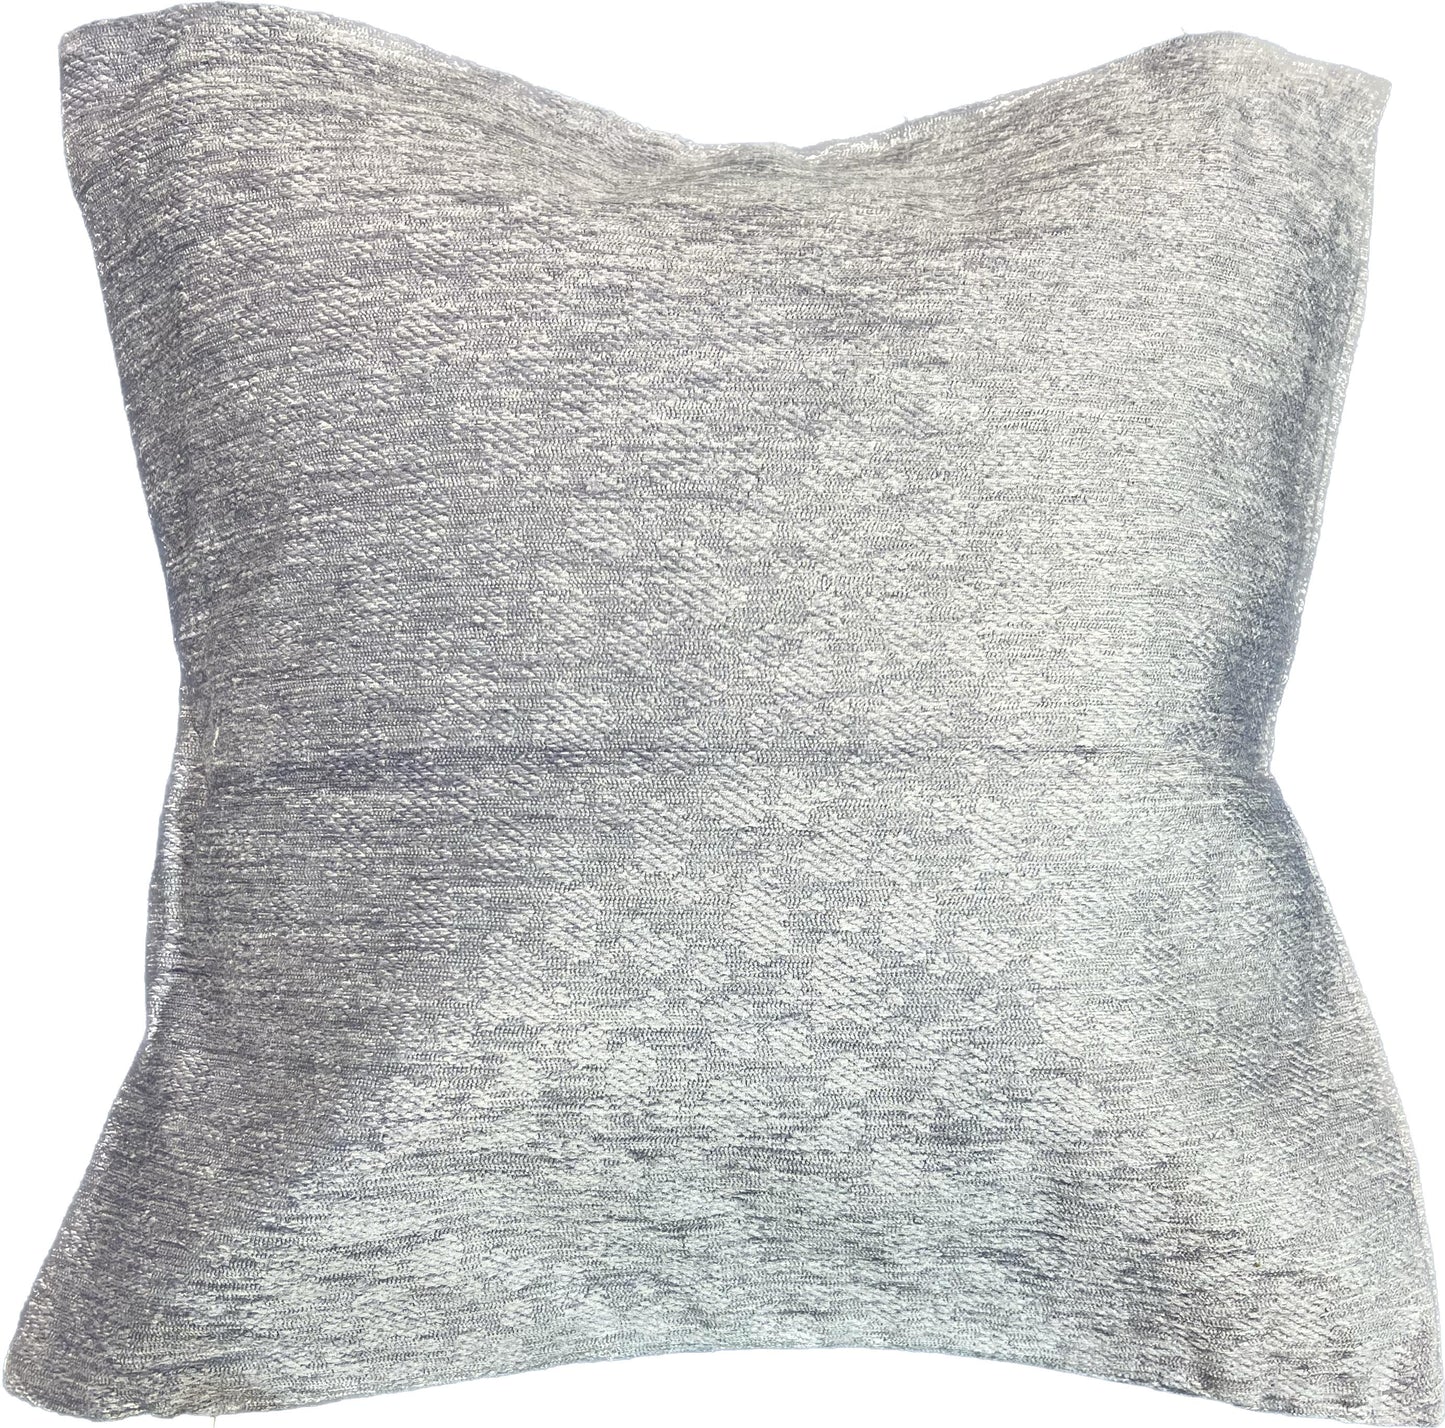 18"x18"  Texture Pillow Cover